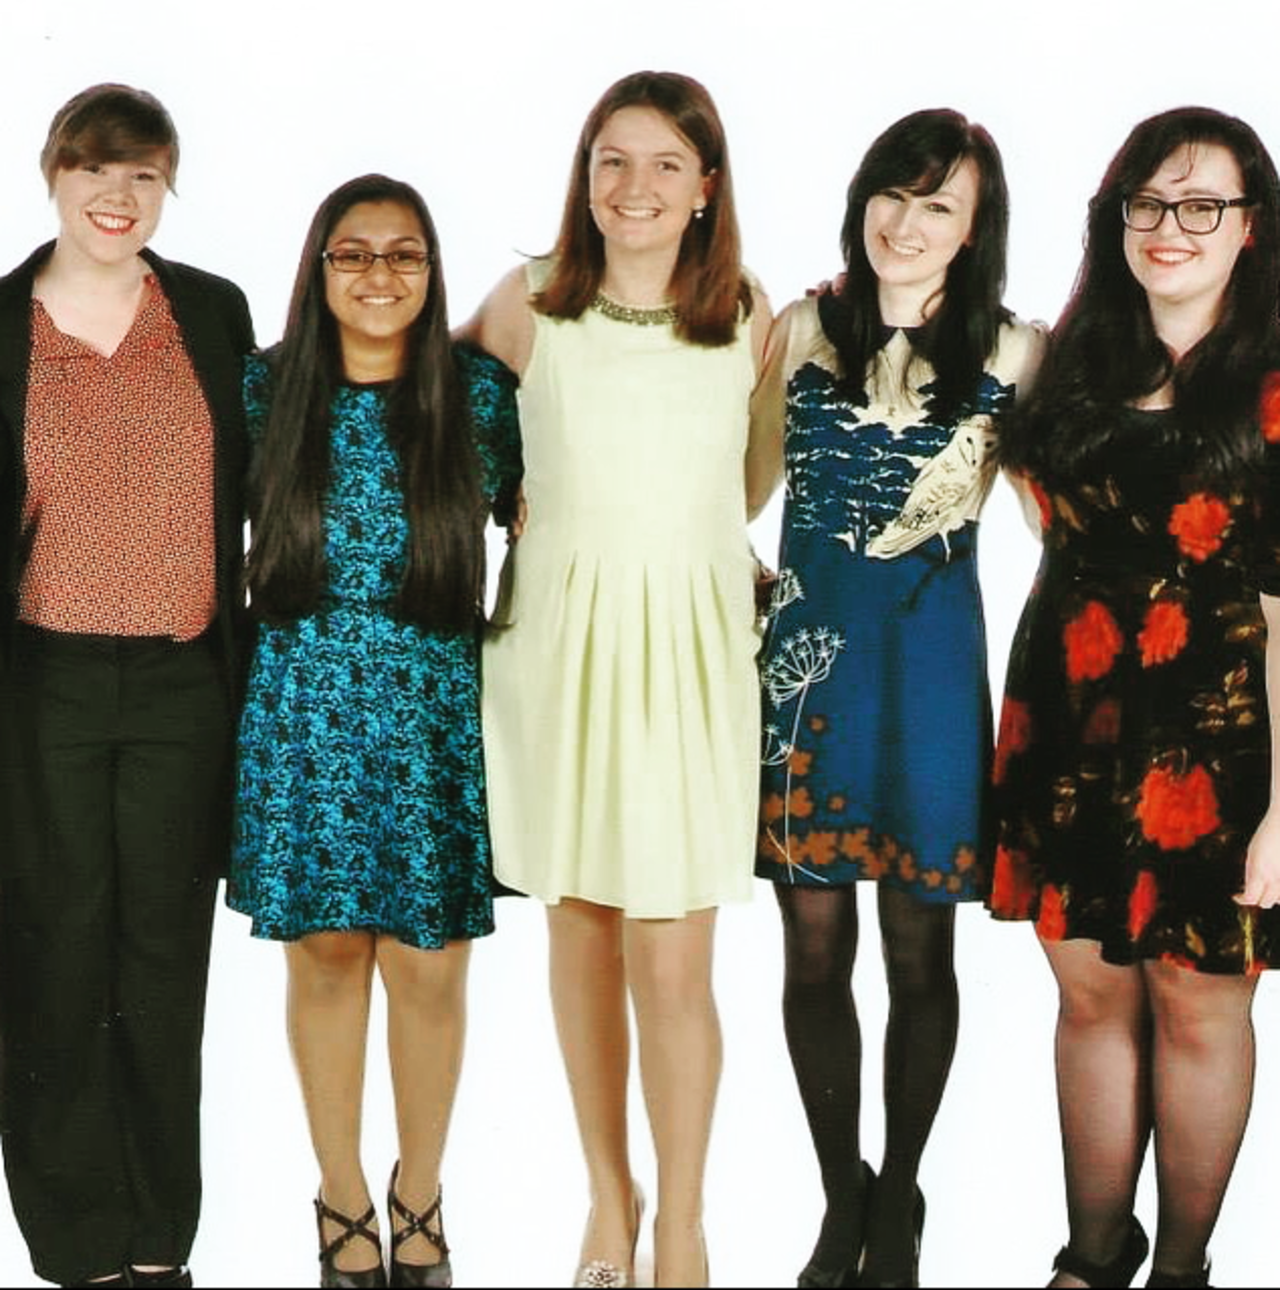 Gough credits her circle of close friends as well as her YouTube viewers with helping her deal with the disorder. Pictured are her friends from college: Emily, Ishani, Sophie and Caitlin (with Gough second from right; last names withheld) in November 2014.